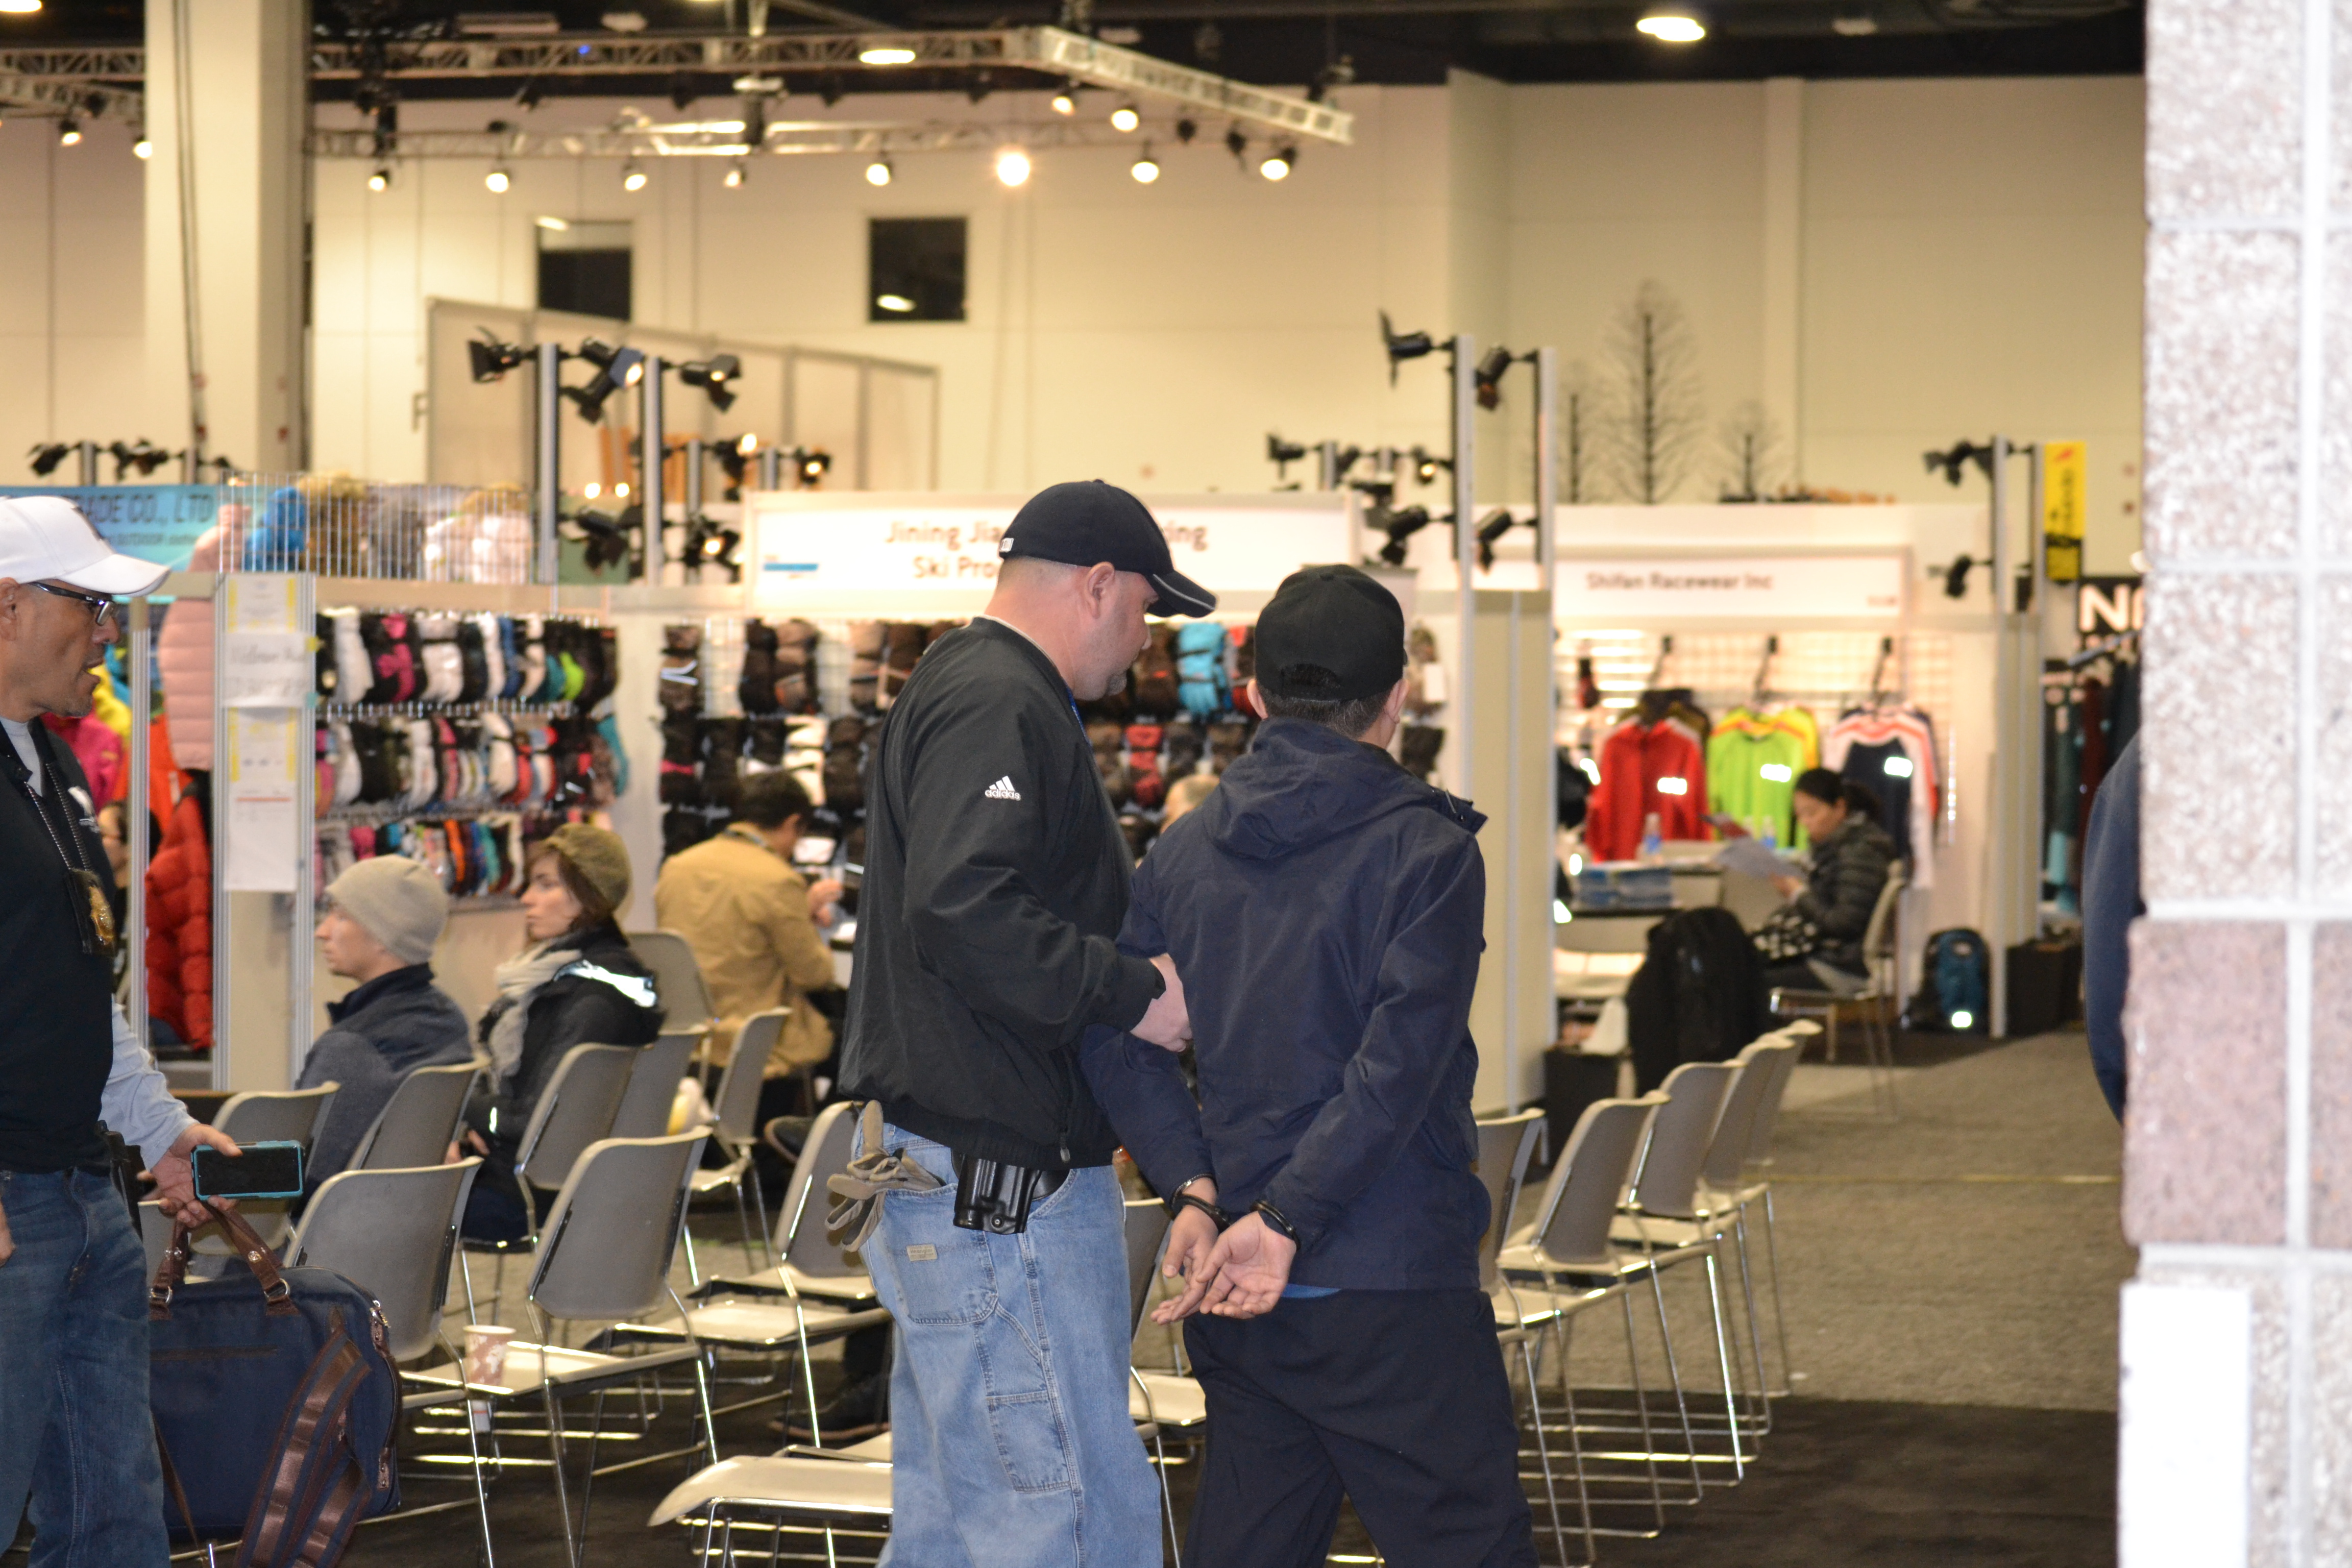 Guangzhou Botai U.S. representative and co-owner, Daniel Gong, being taken into custody on the showroom floor at the SIA Snow Show in Denver, CO.